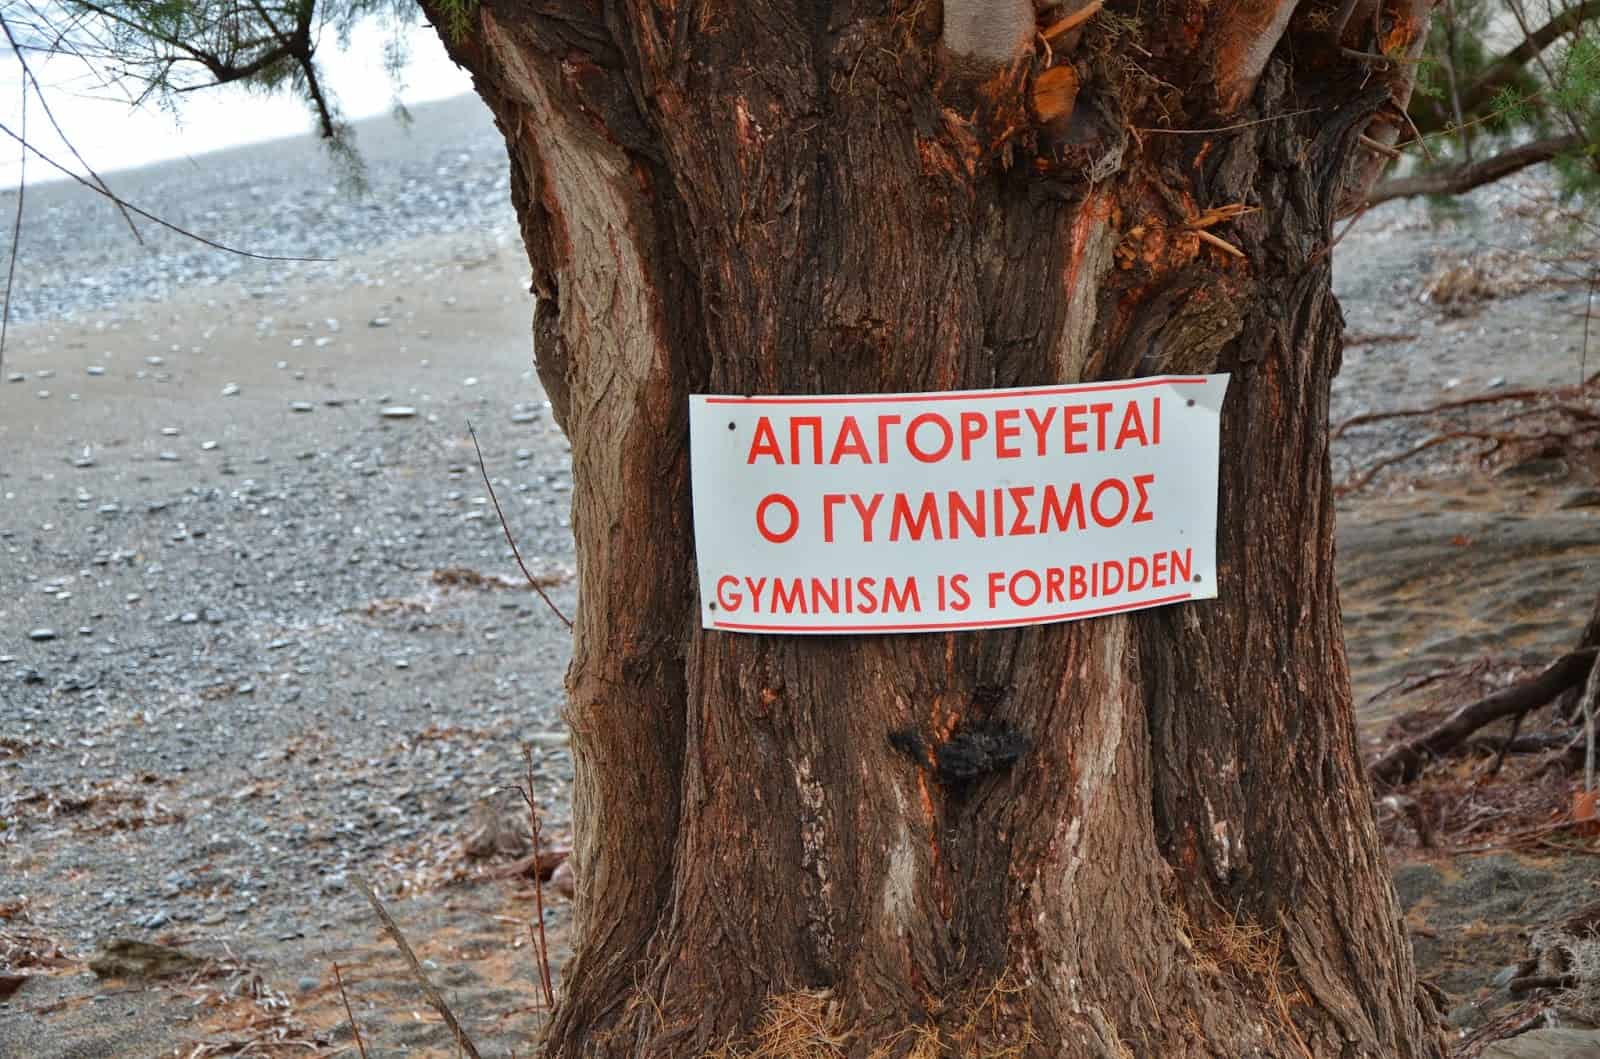 This is a holy place. No “gymnism” is allowed! in Chios, Greece